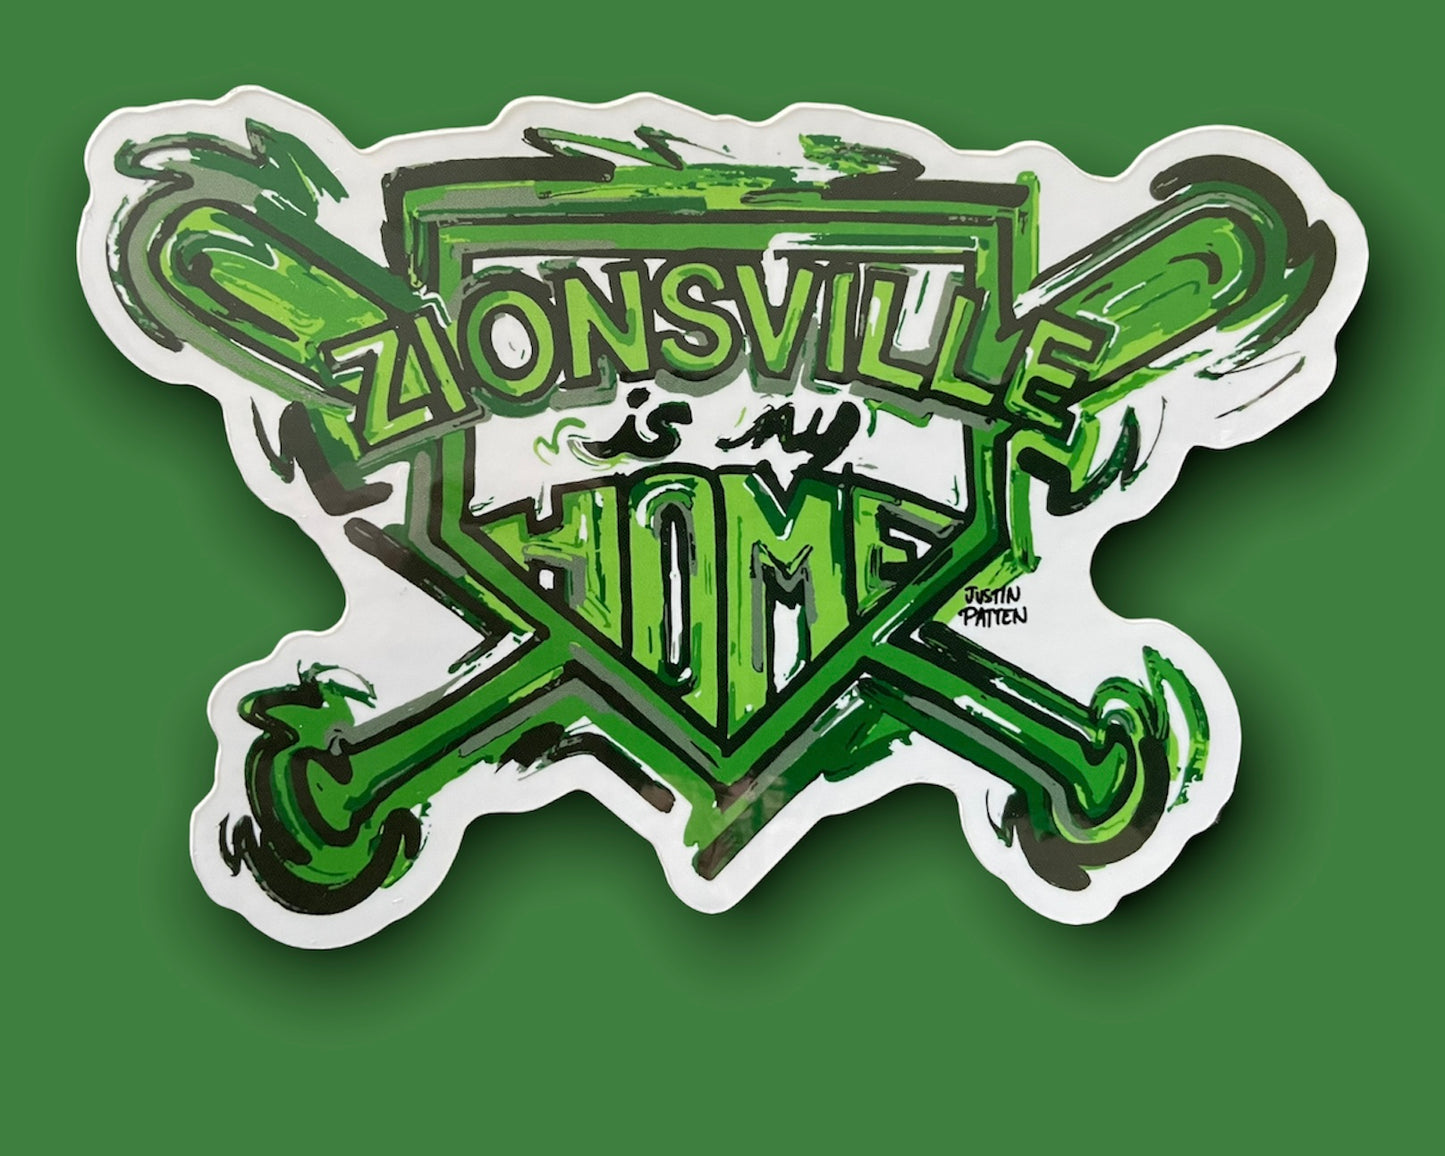 Zionsville Indiana Is My Home Sticker by Justin Patten